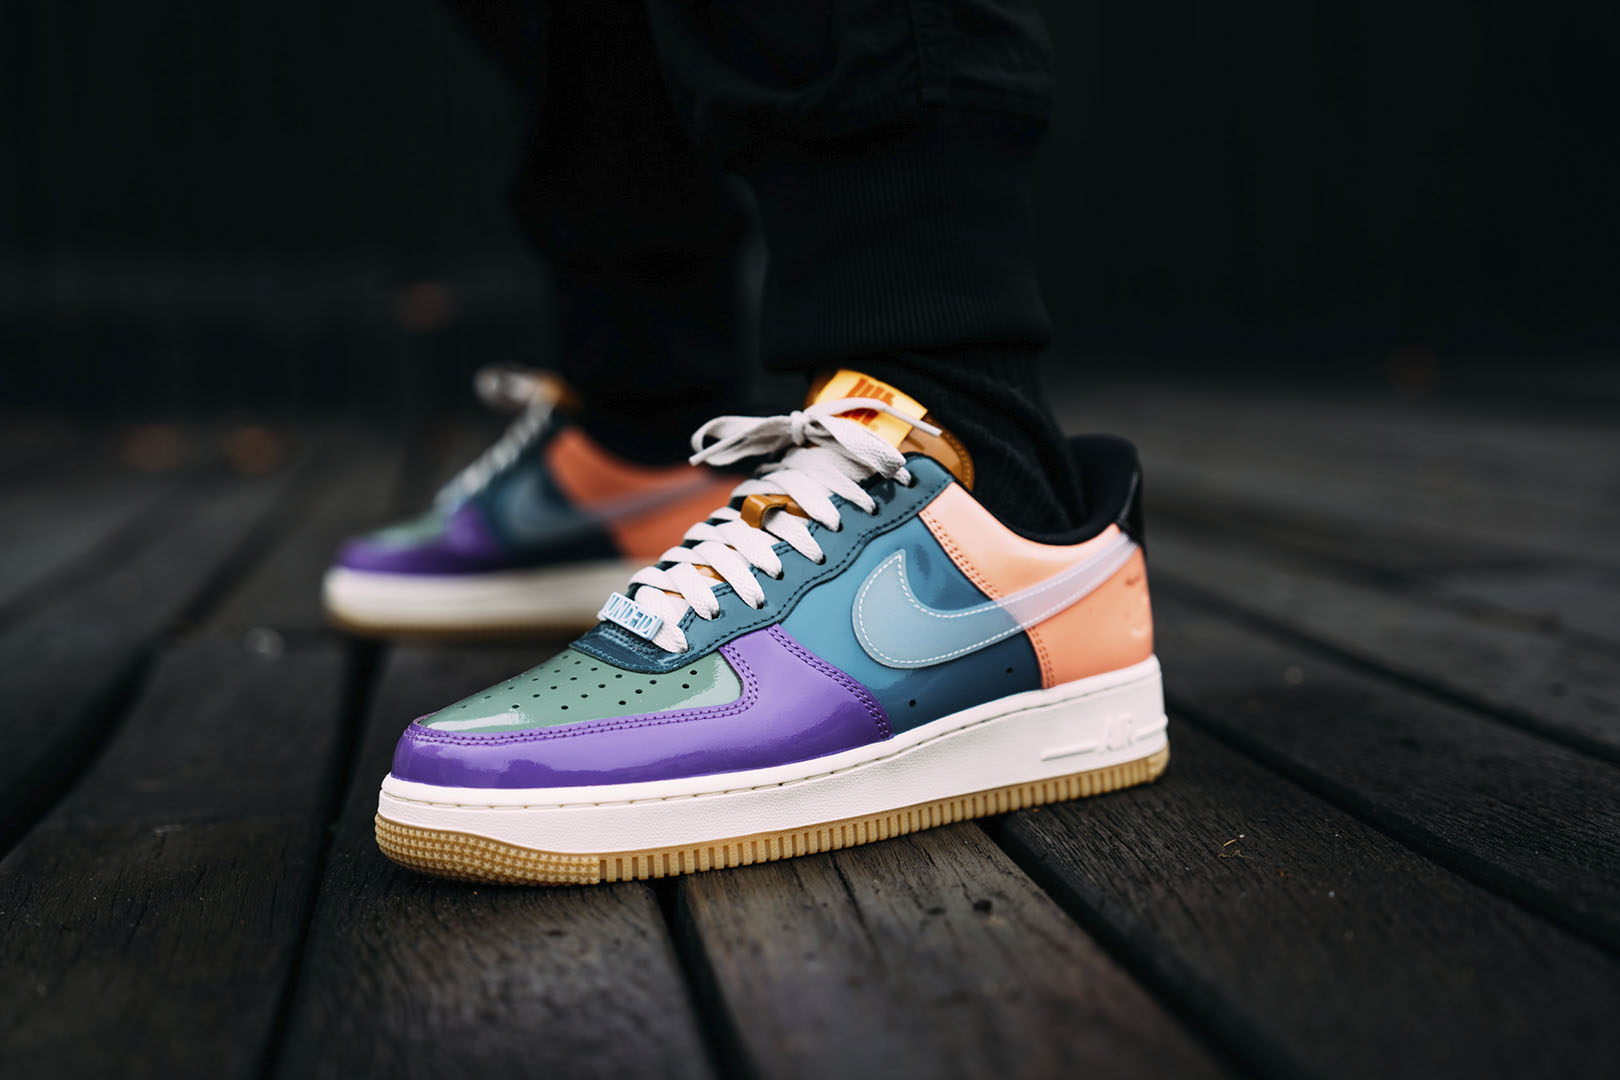 Men's shoes Nike x UNDEFEATED Air Force 1 Low SP Wild Berry